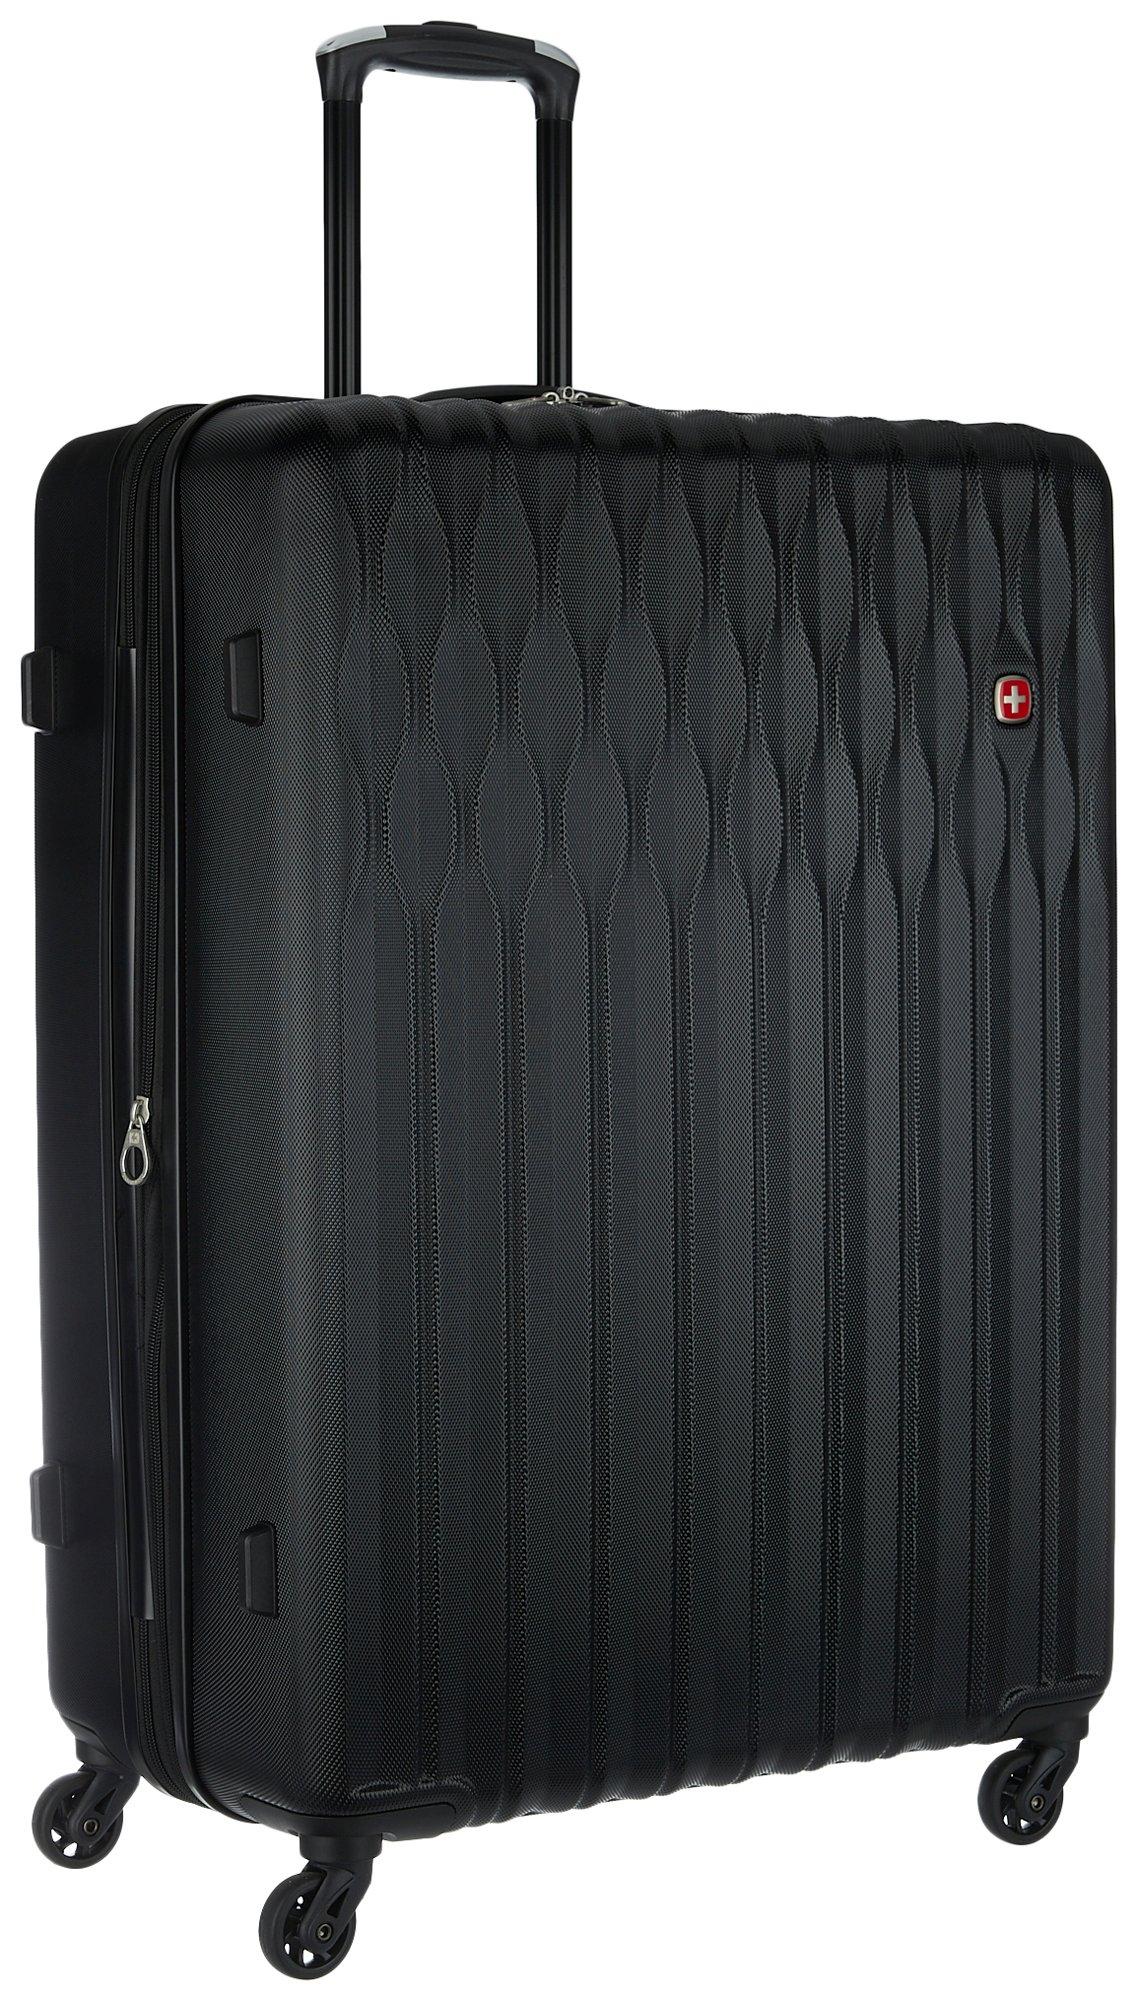 Swiss Gear 27'' 8018 Expandable Hardside Spinner Luggage